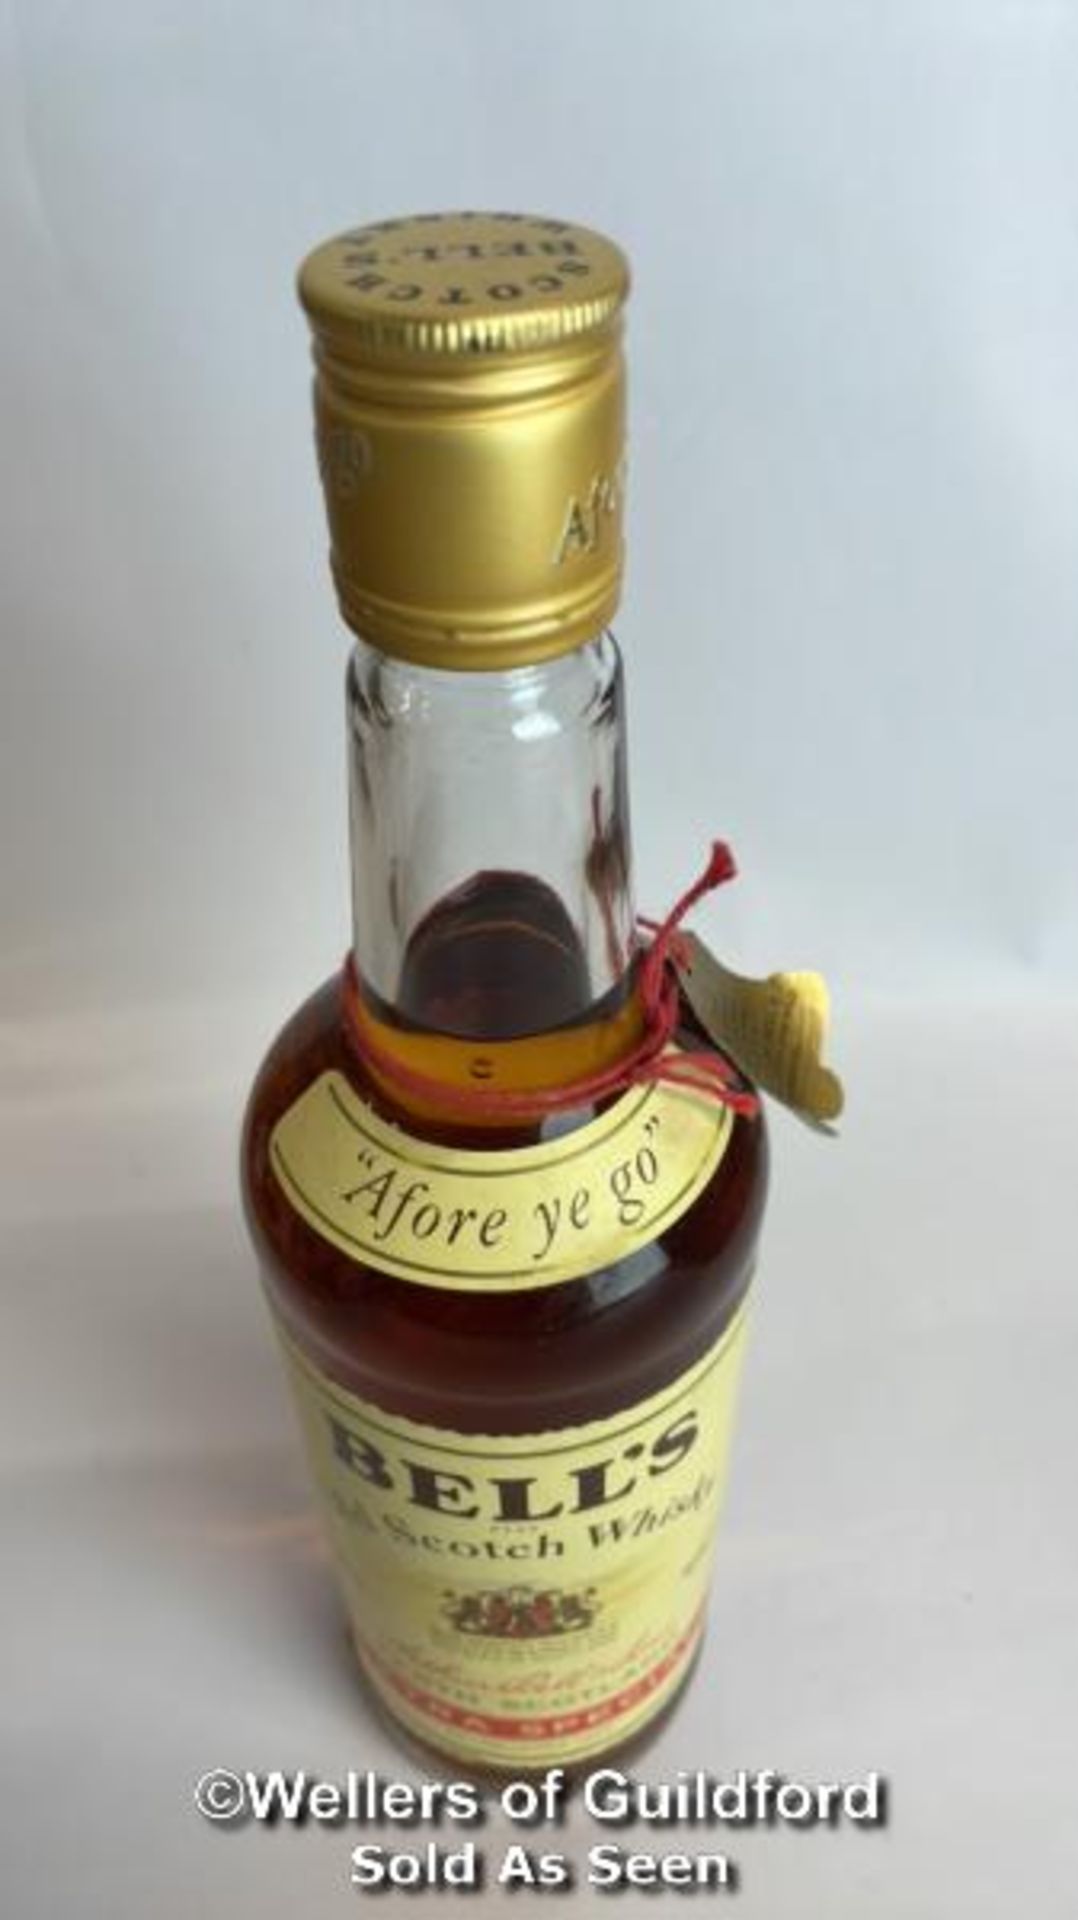 Bell's Extra Special Old Scotch Whisky, "Afore Ye Go", 75cl, 43% vol, In original box / Please see - Image 12 of 12